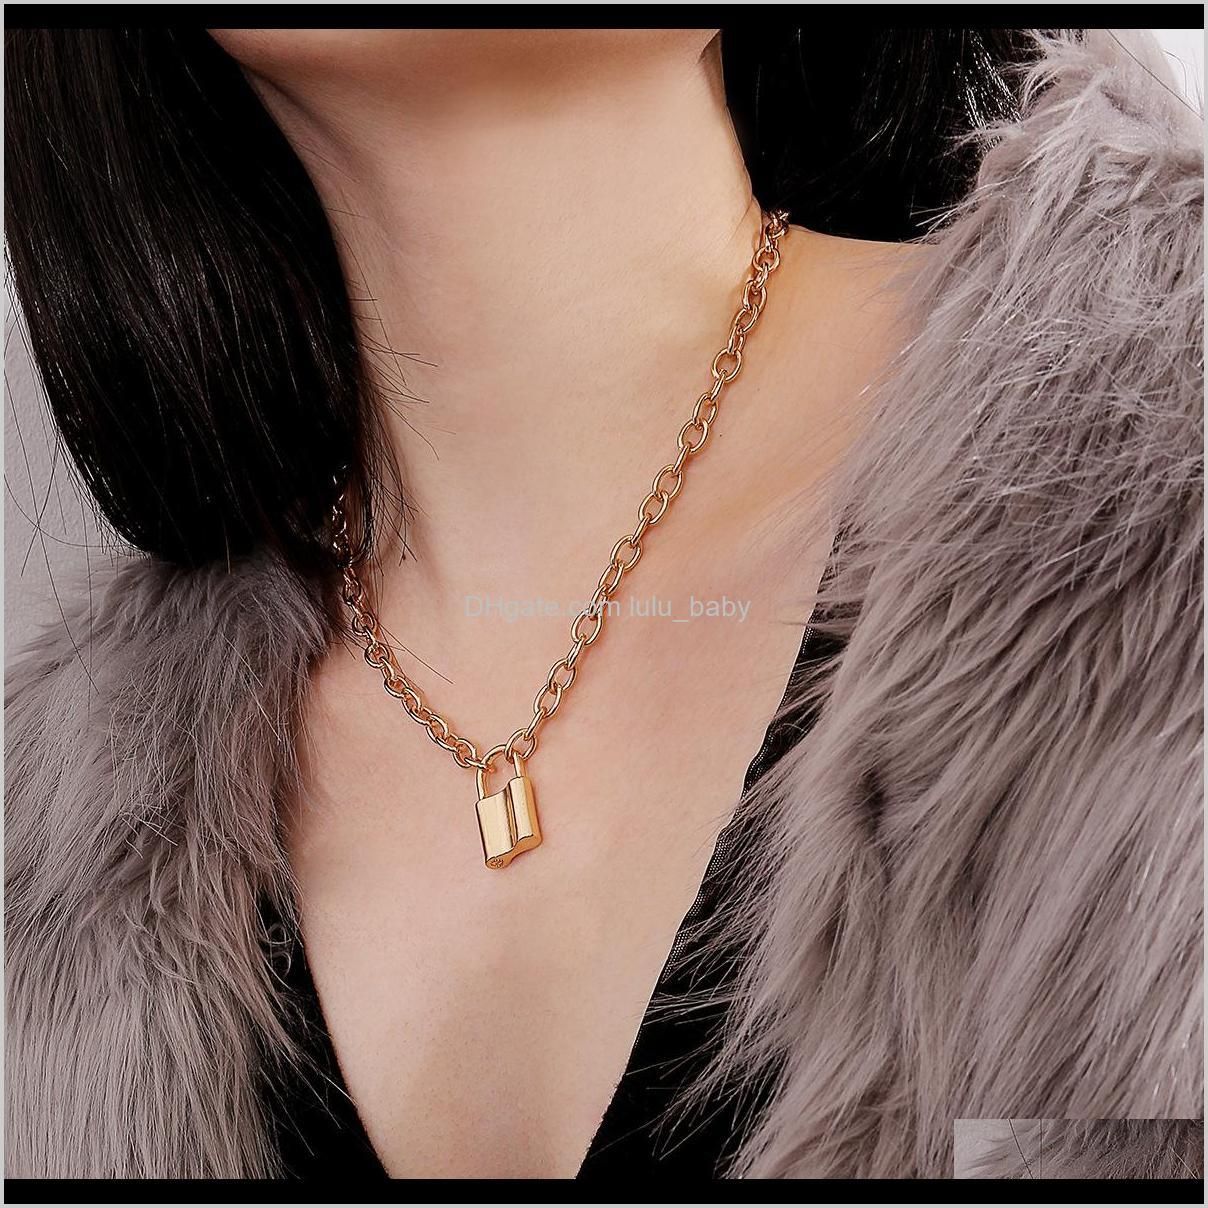 rongho new women vintage metal lock pendant necklace gold choker necklace hiphop femme pendant chain necklace jewelry